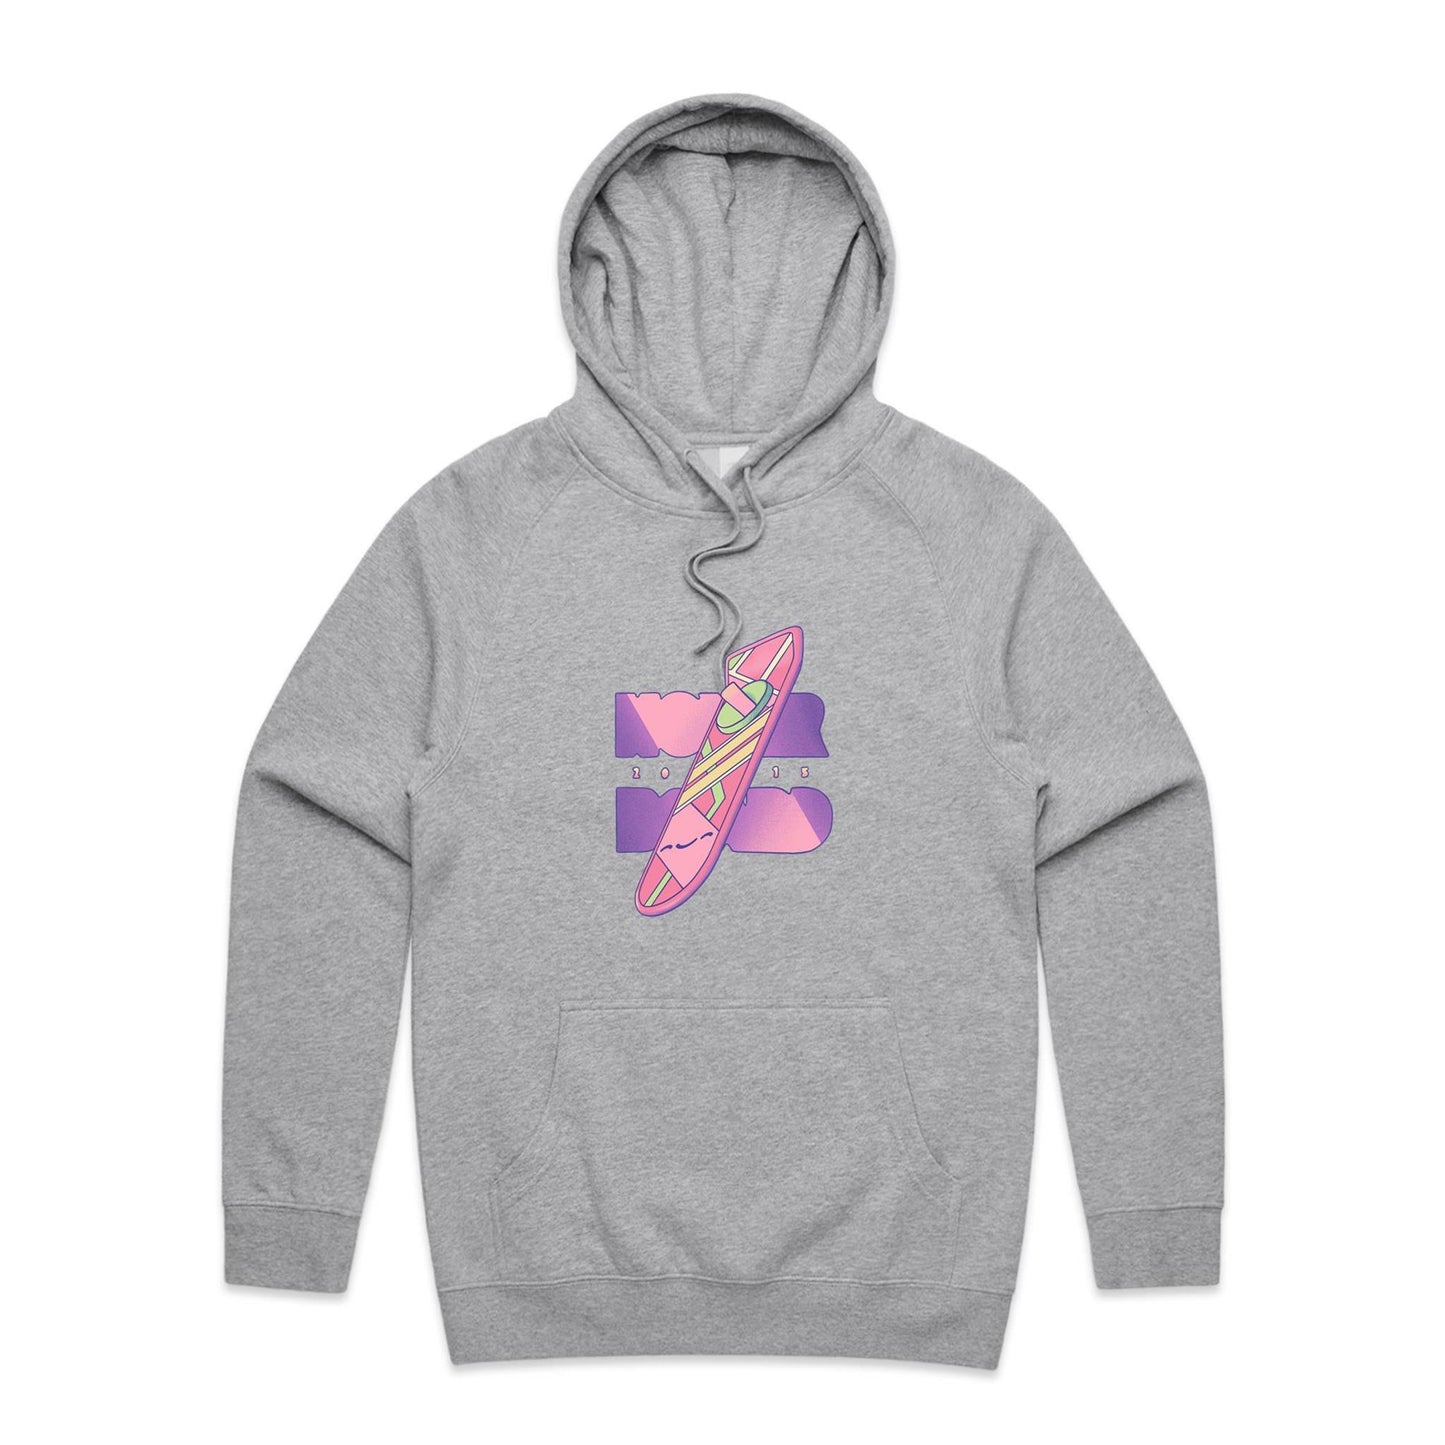 Time to say McFly - Unisex Hoodie